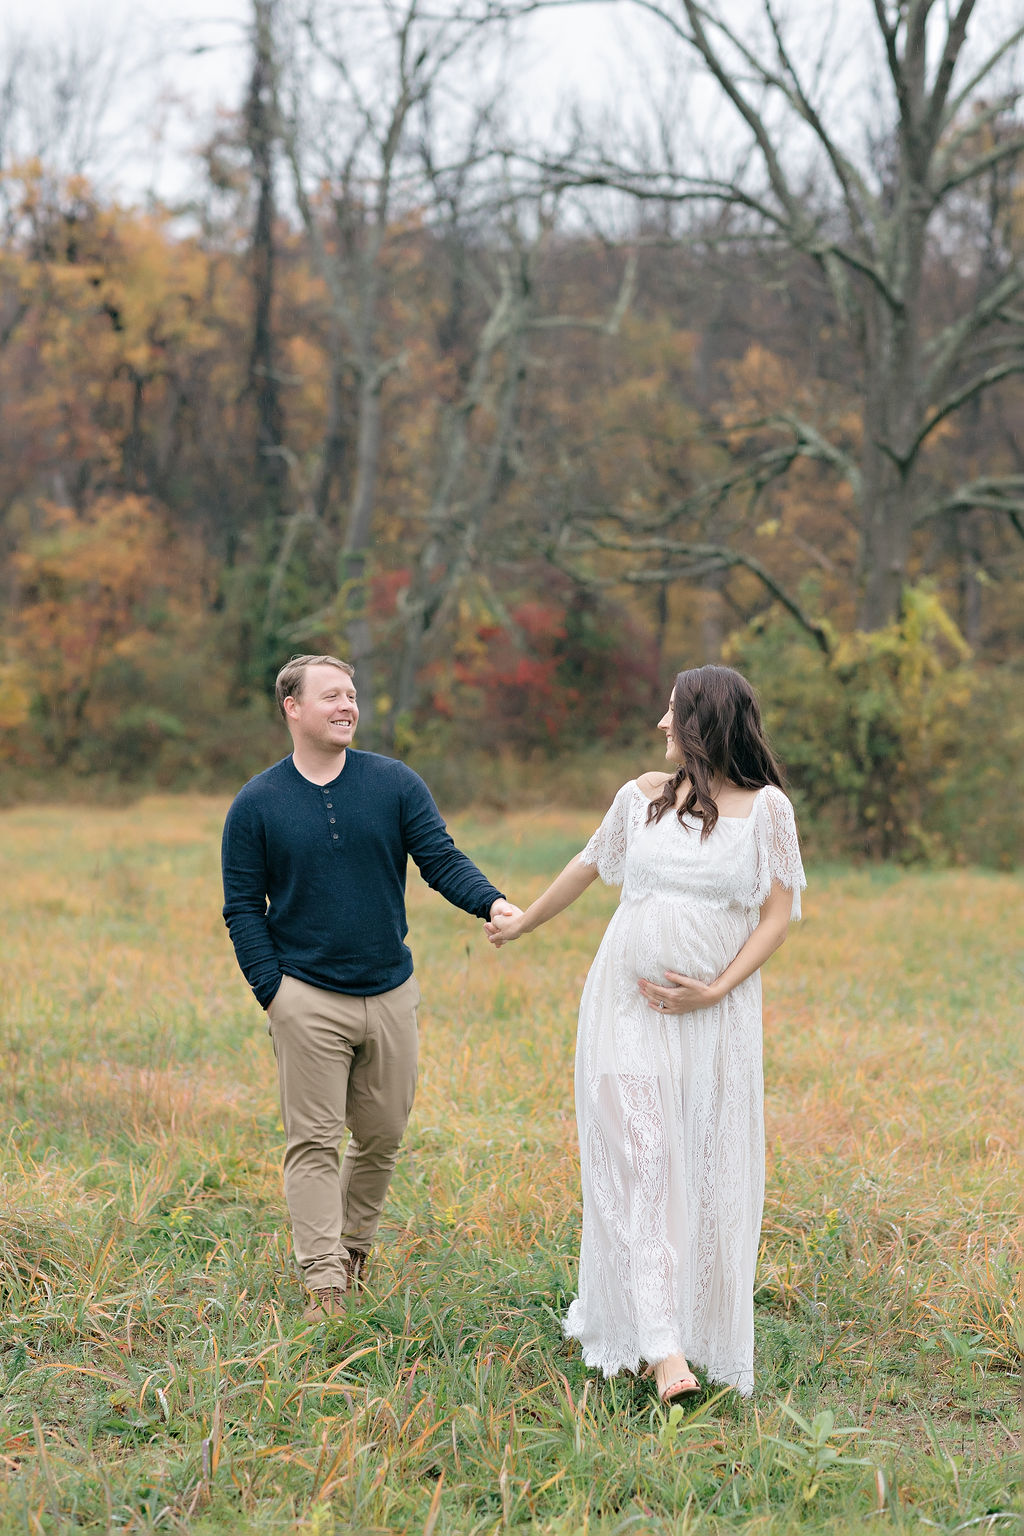 A mom to be in a white maternity gown leads her husband by the hand through a field of grass while holding the bump